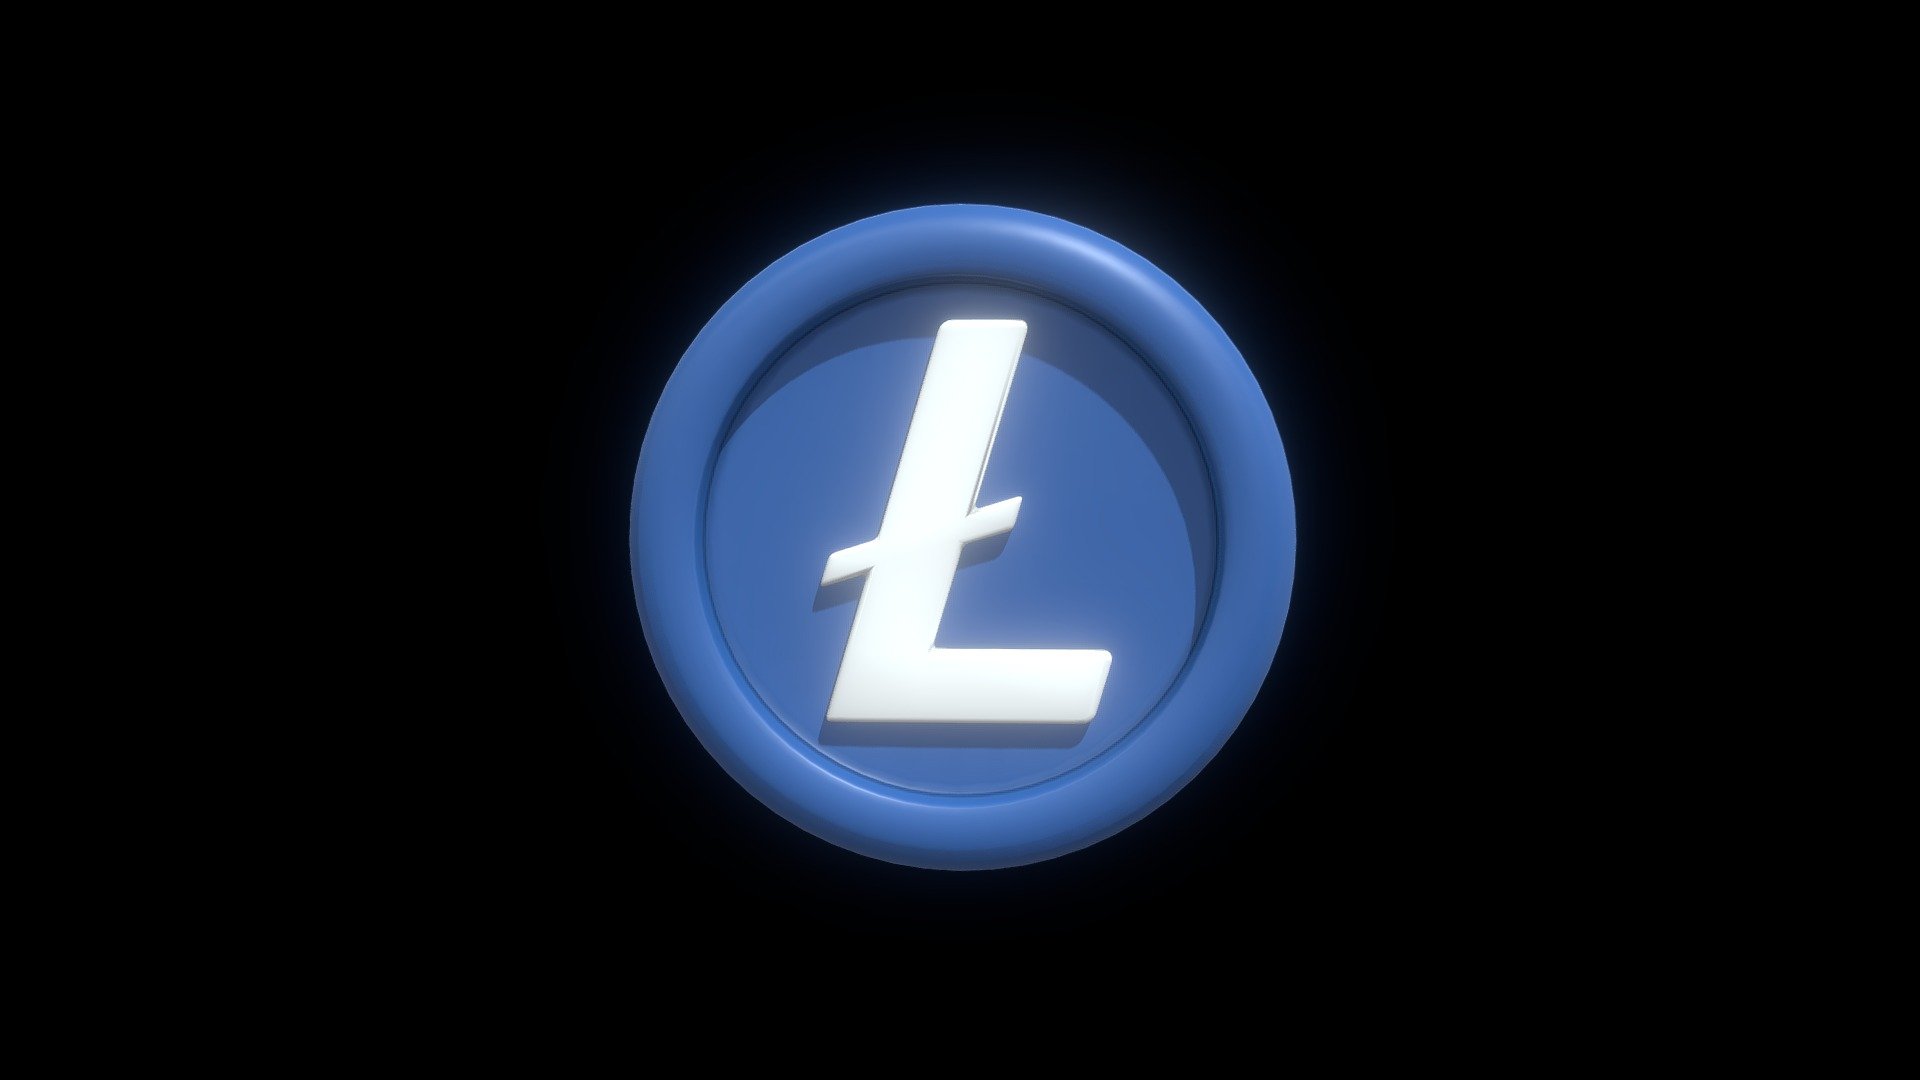 Litecoin or LTC Blue coin 3D model with cartoon style Made in Blender 3.1.2

This model does include a TEXTURE, DIFFUSE and ROUGHNESS MAP, but if you want to change the color you can change it in the blend file, just use the principled bsdf and play with the rough and base color parameter

in the blender file i just included the lighting setting for rendering just like the preview image

If you want to get this model, just check my Artstation Profile Page in Here
https://www.artstation.com/cangbacang/profile - Litecoin or LTC Blue coin with cartoon style - 3D model by cangbacang 3d model